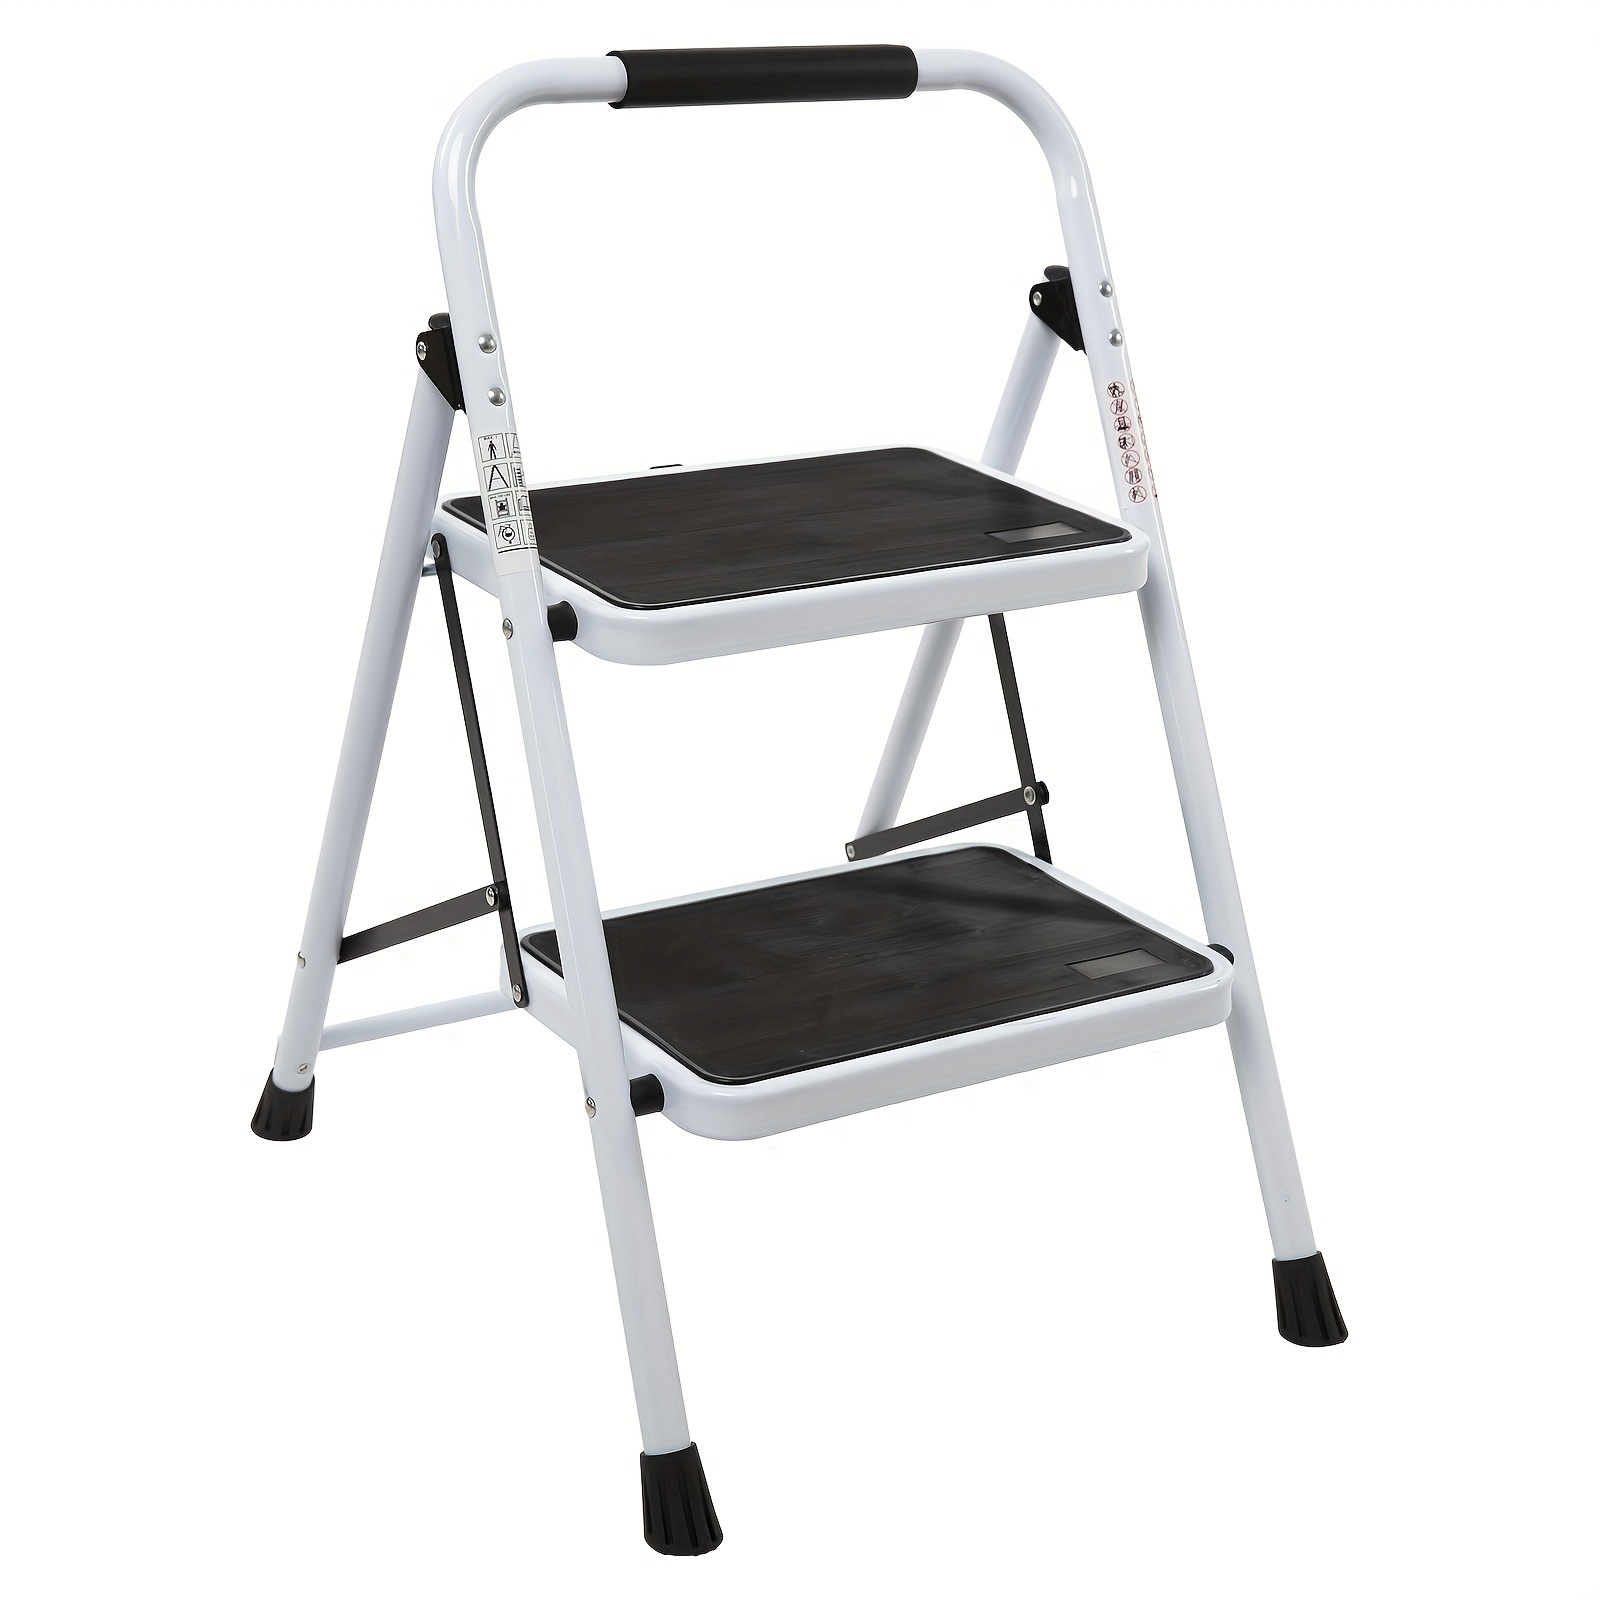 

2 Step Ladder Folding Step Stool For Adults With Top Handrail 330 Lbs Capacity, Lightweight & Portable Step 2stool Ladders With Wide Pedal For Home Kitchen Sturdy Steel Frame